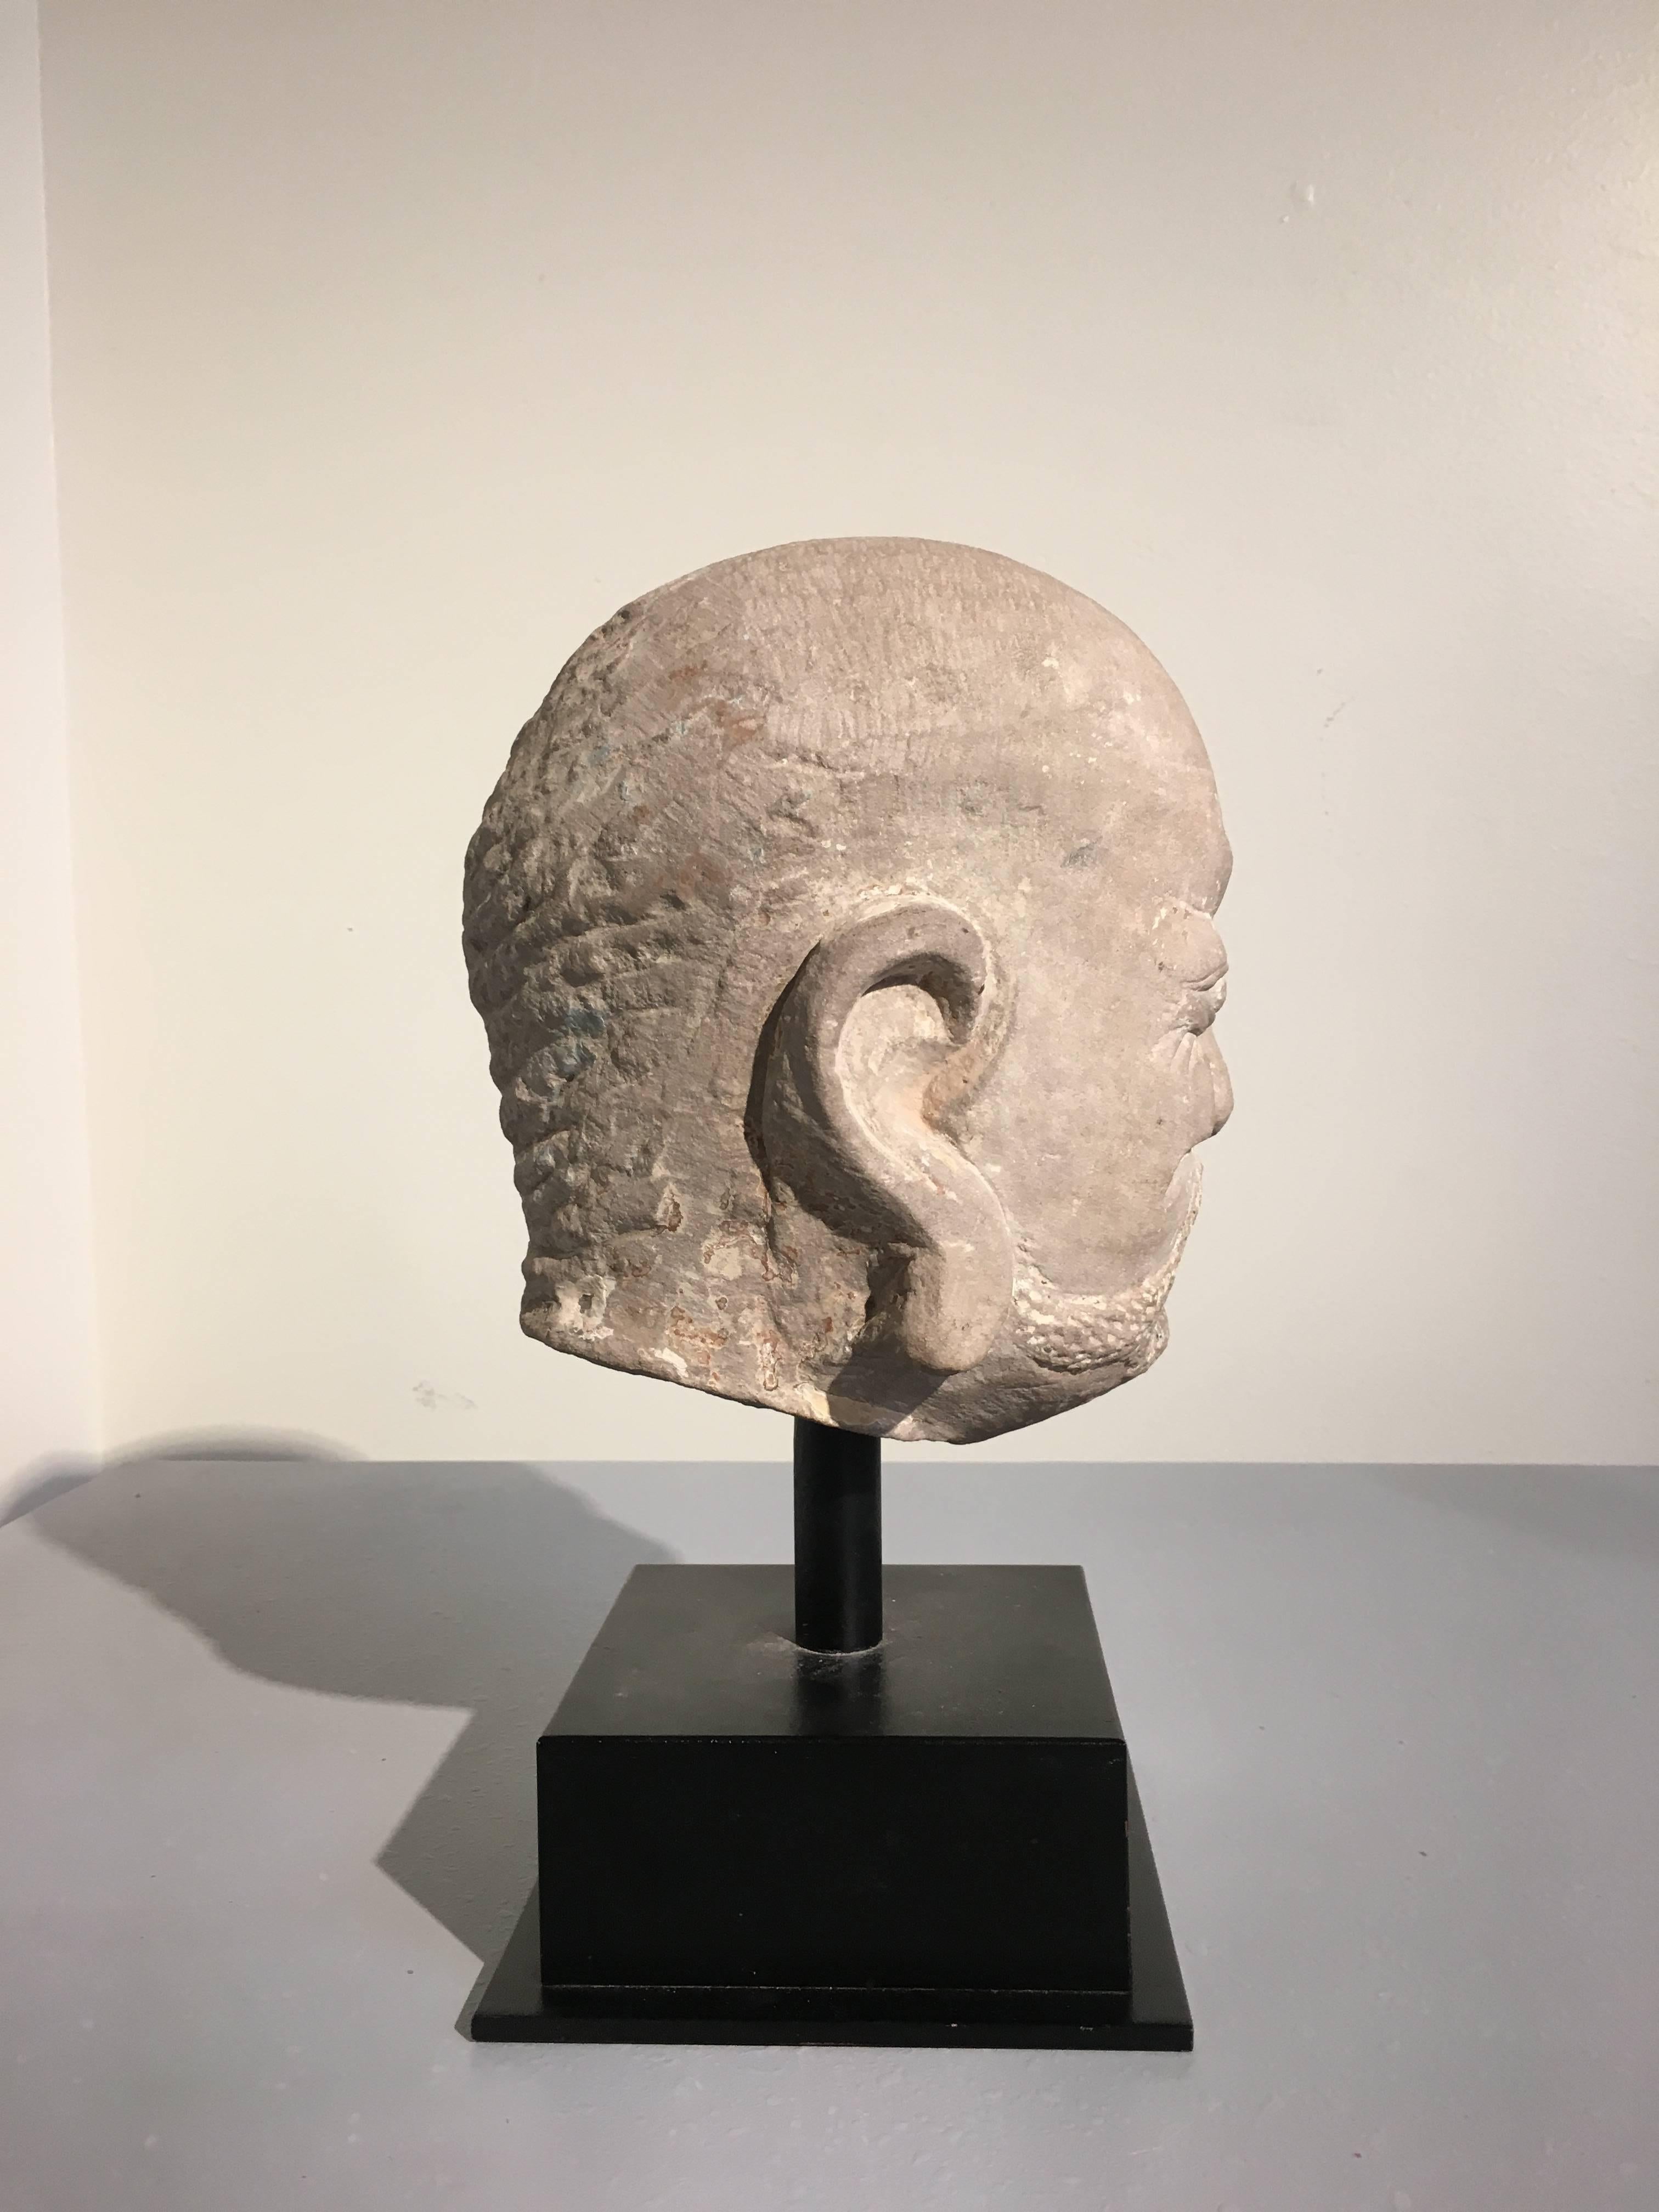 Hand-Carved Chinese Carved Limestone Luohan Head, Yuan Dynasty, 1271 - 1368